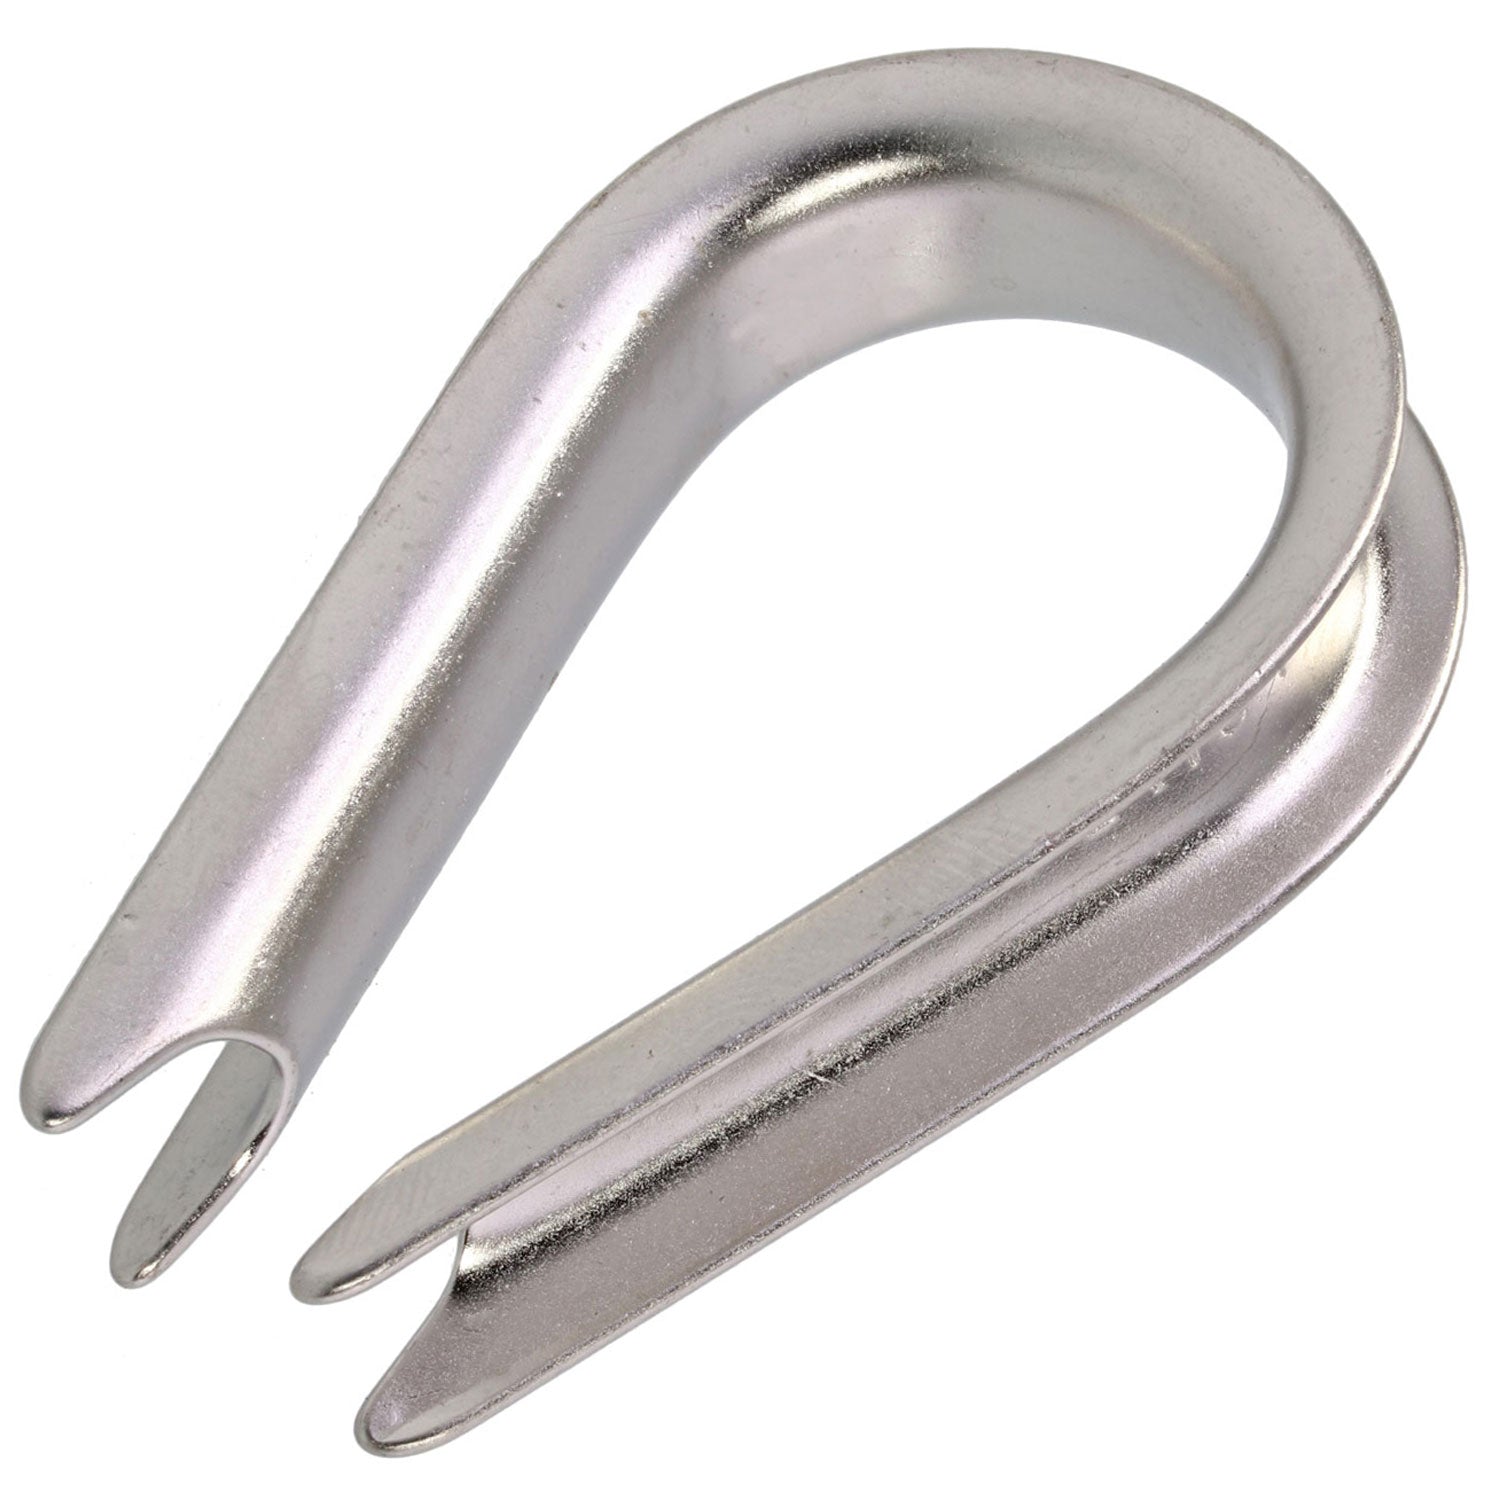 3/16 Light Duty Stainless Steel Wire Rope Thimble